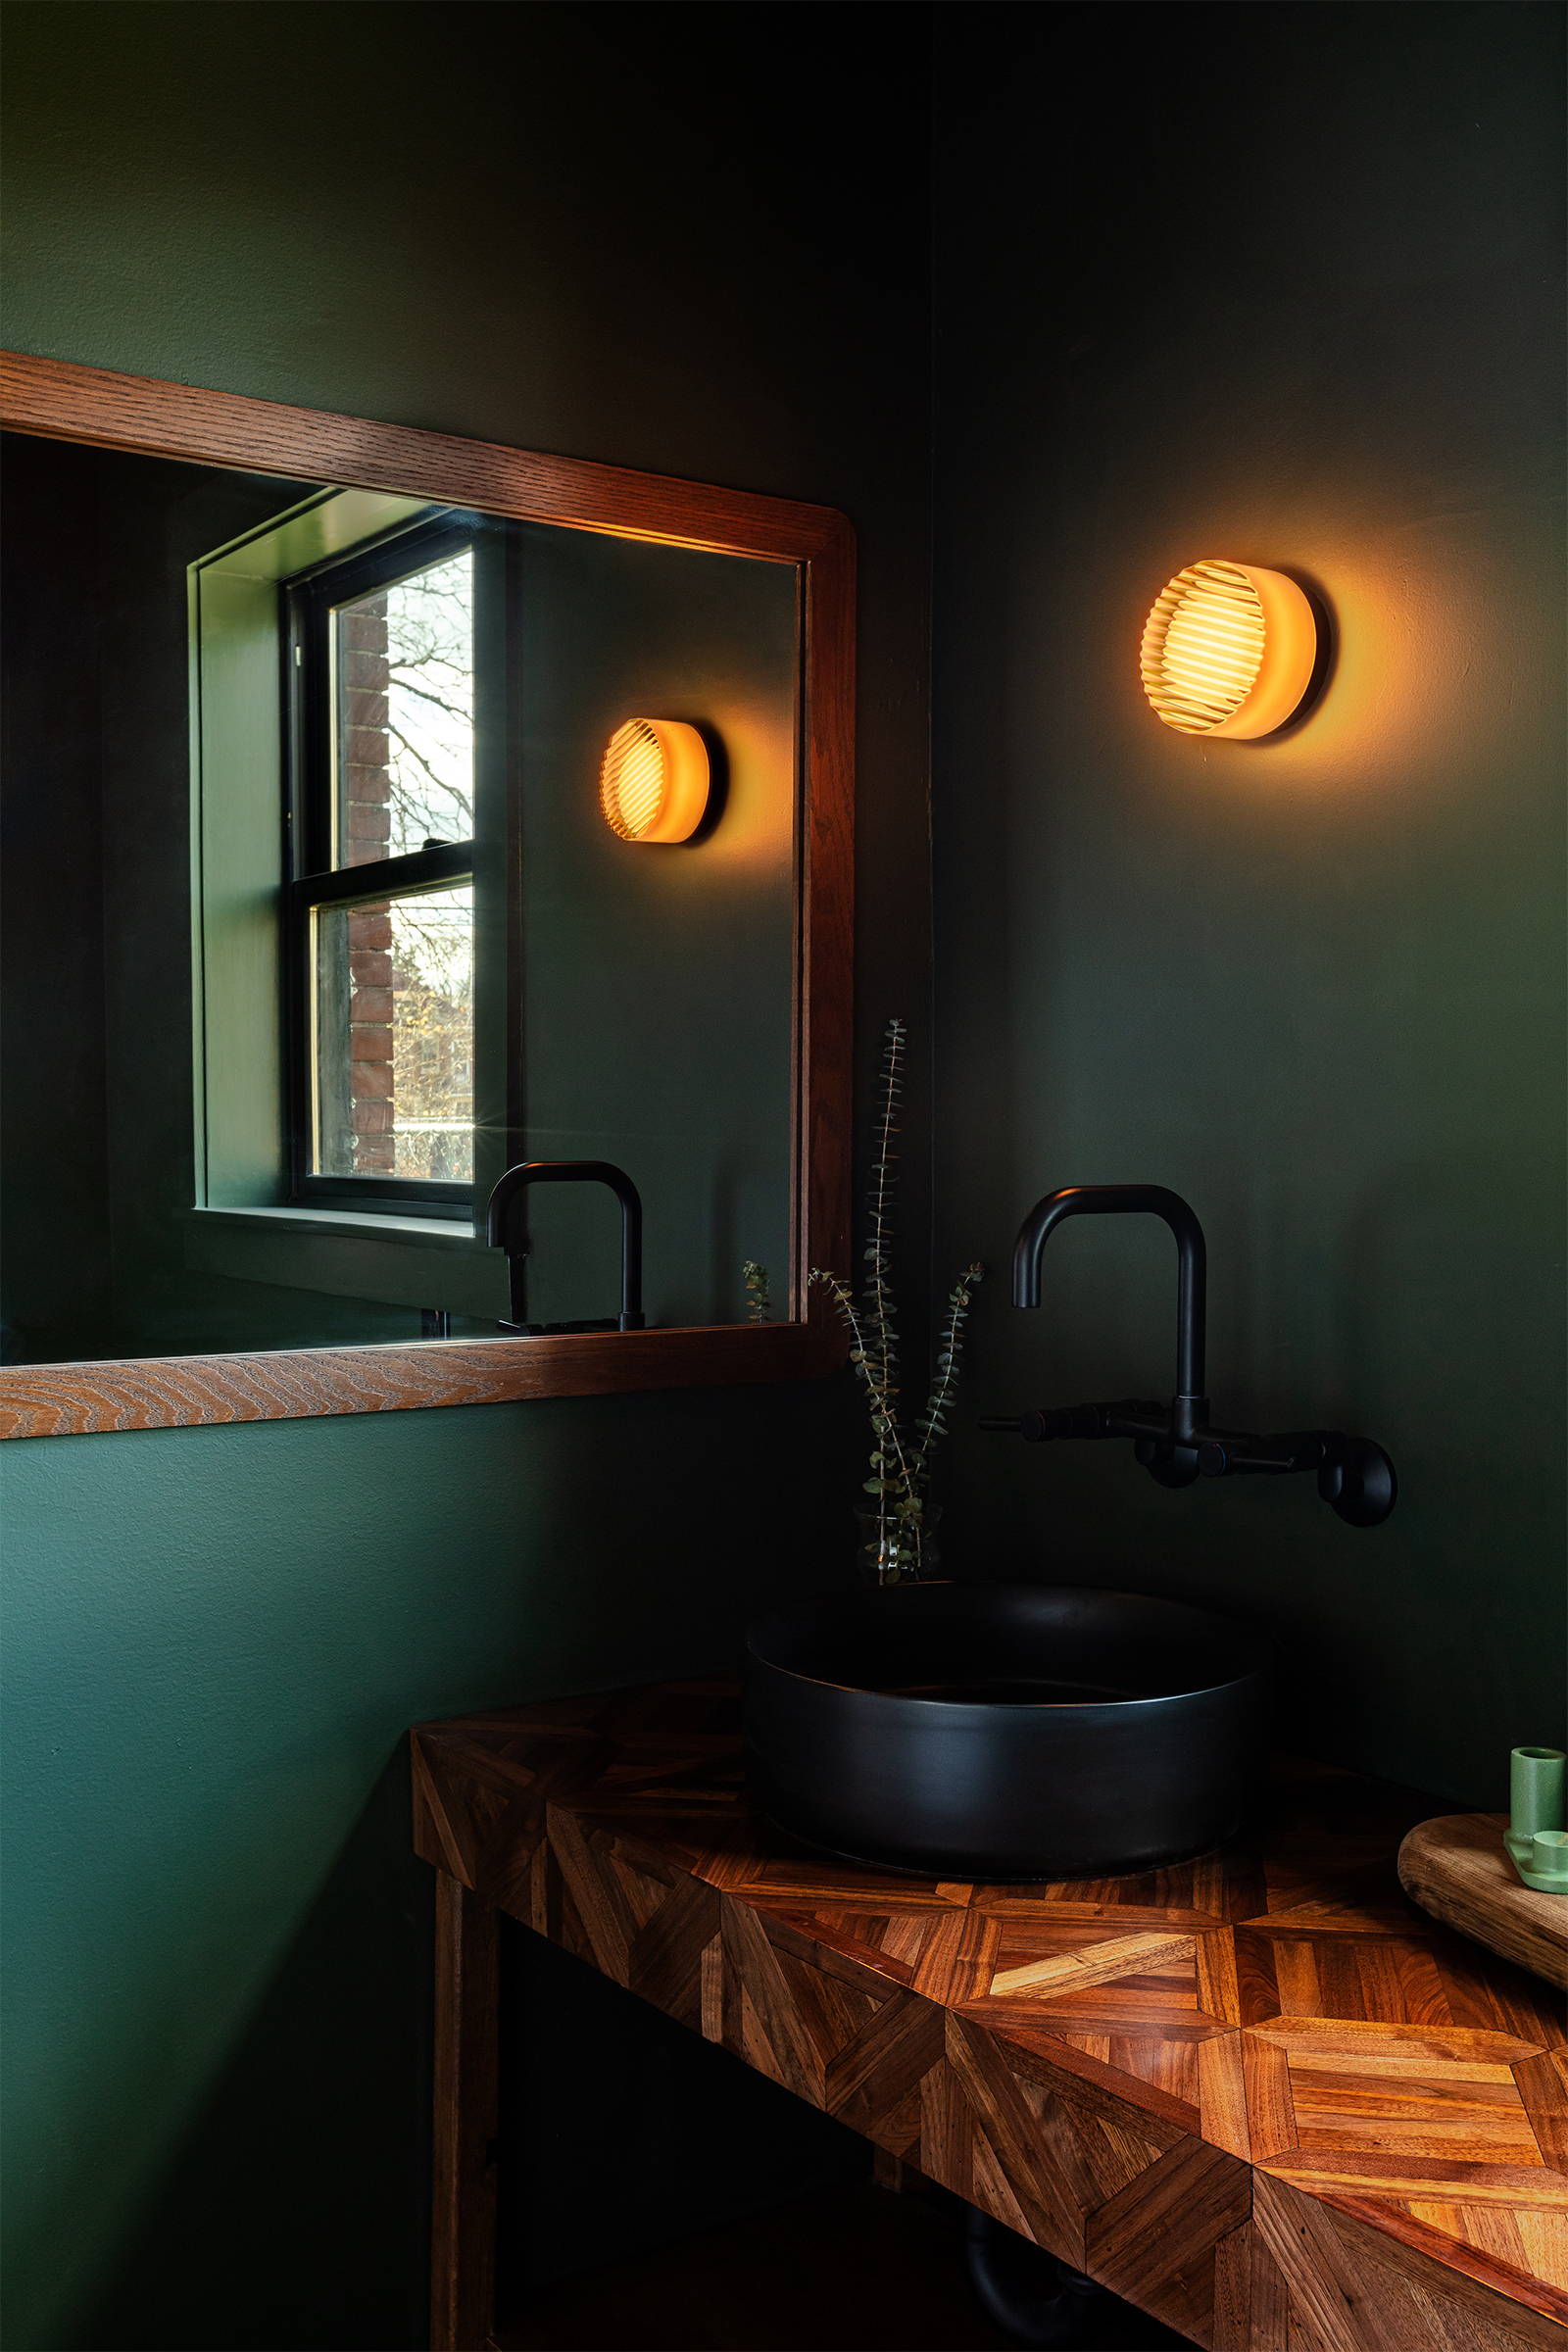 Image of bathroom interior design, featuring a modern  vanity designed by Woodward Throwbacks out of reclaimed parquet flooring.